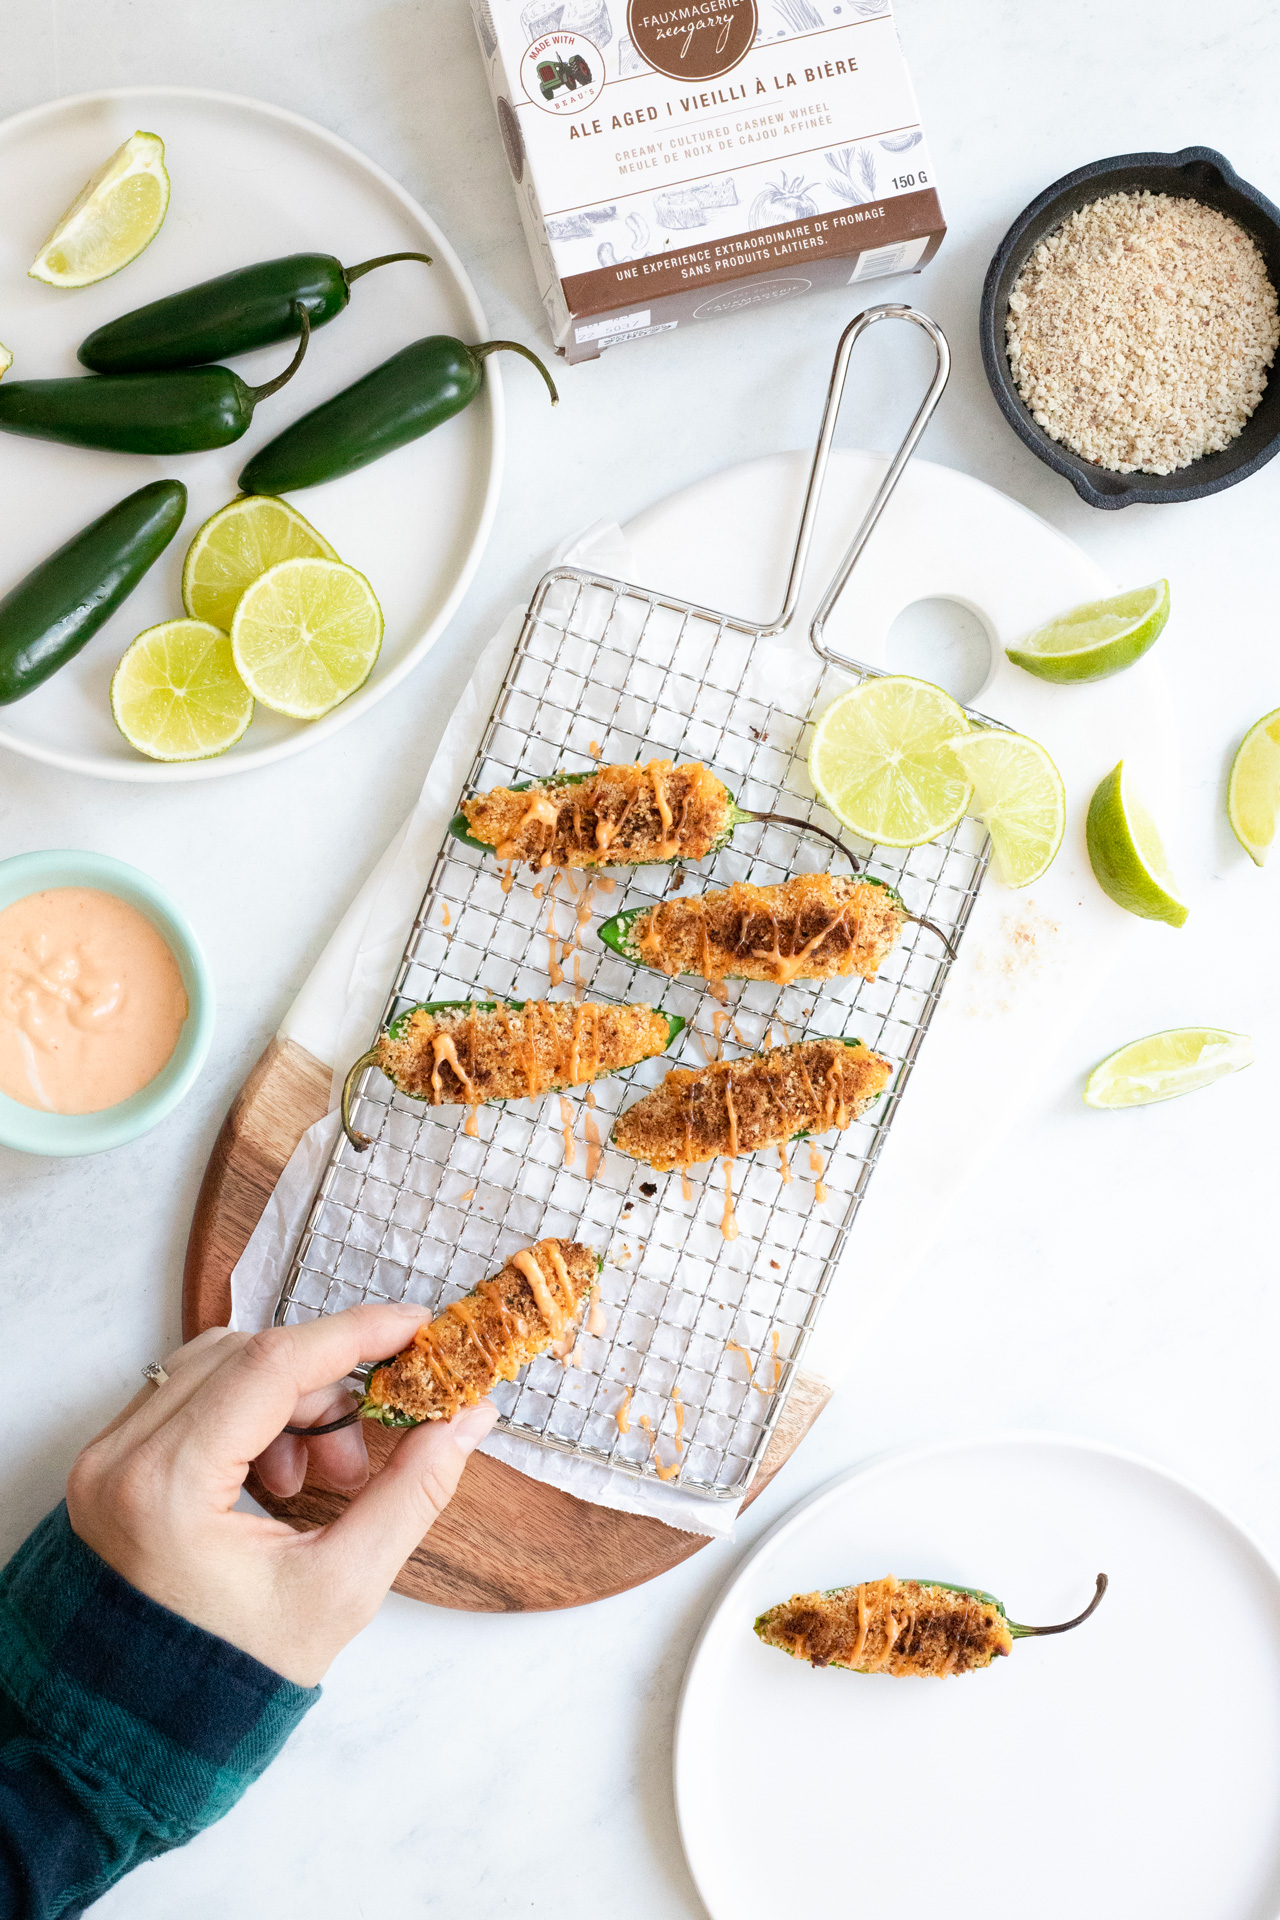 Vegan Jalapeno Poppers with a hand and plate